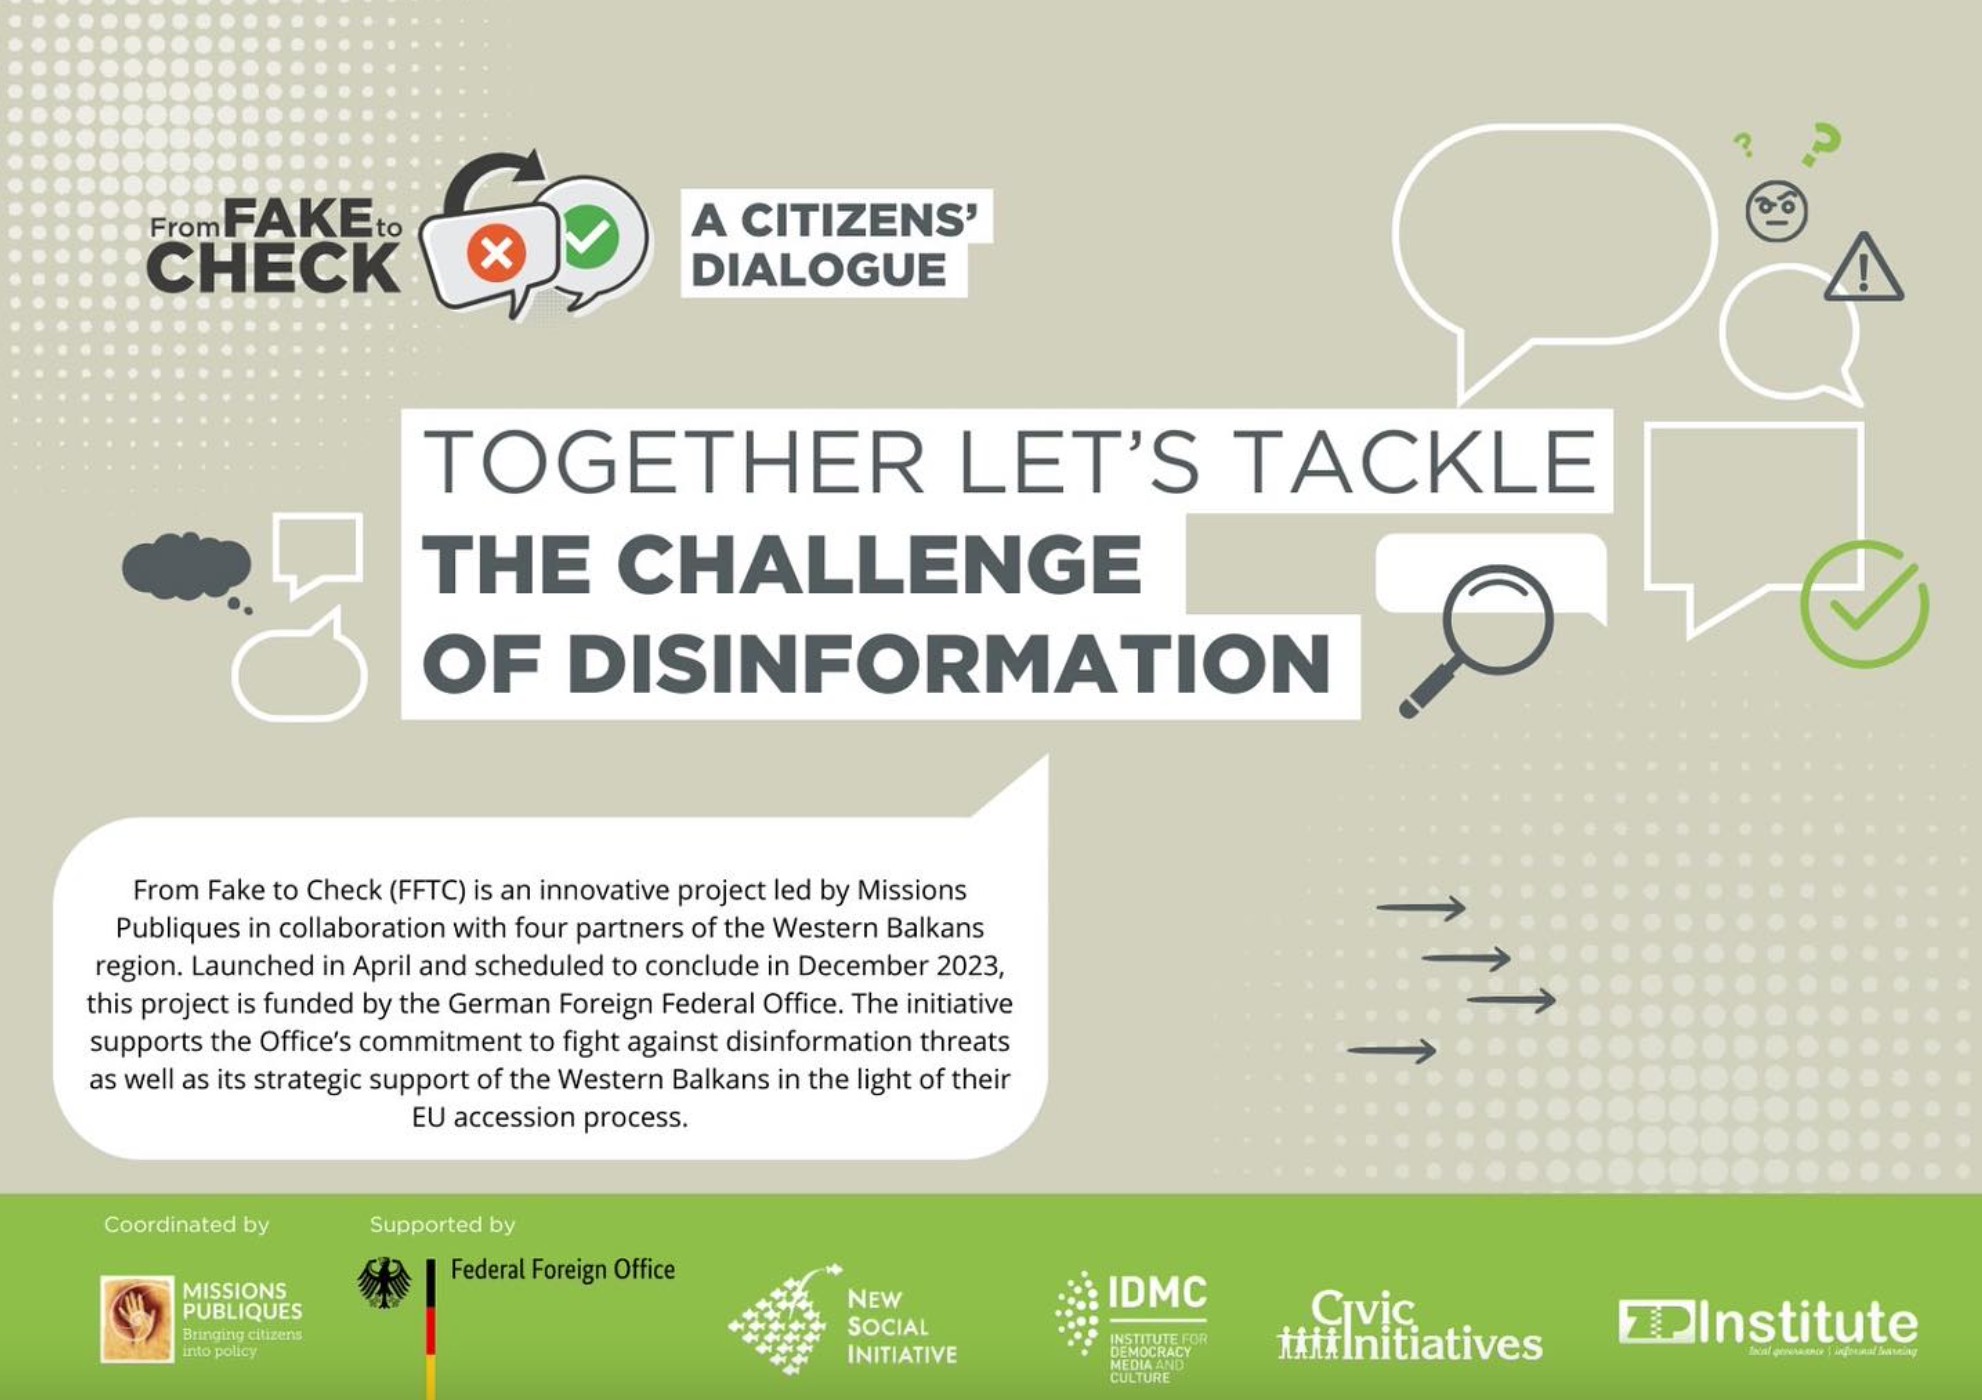 Mission Publique - Citizens’ Dialogues on Tackling Disinformation in the Western Balkans